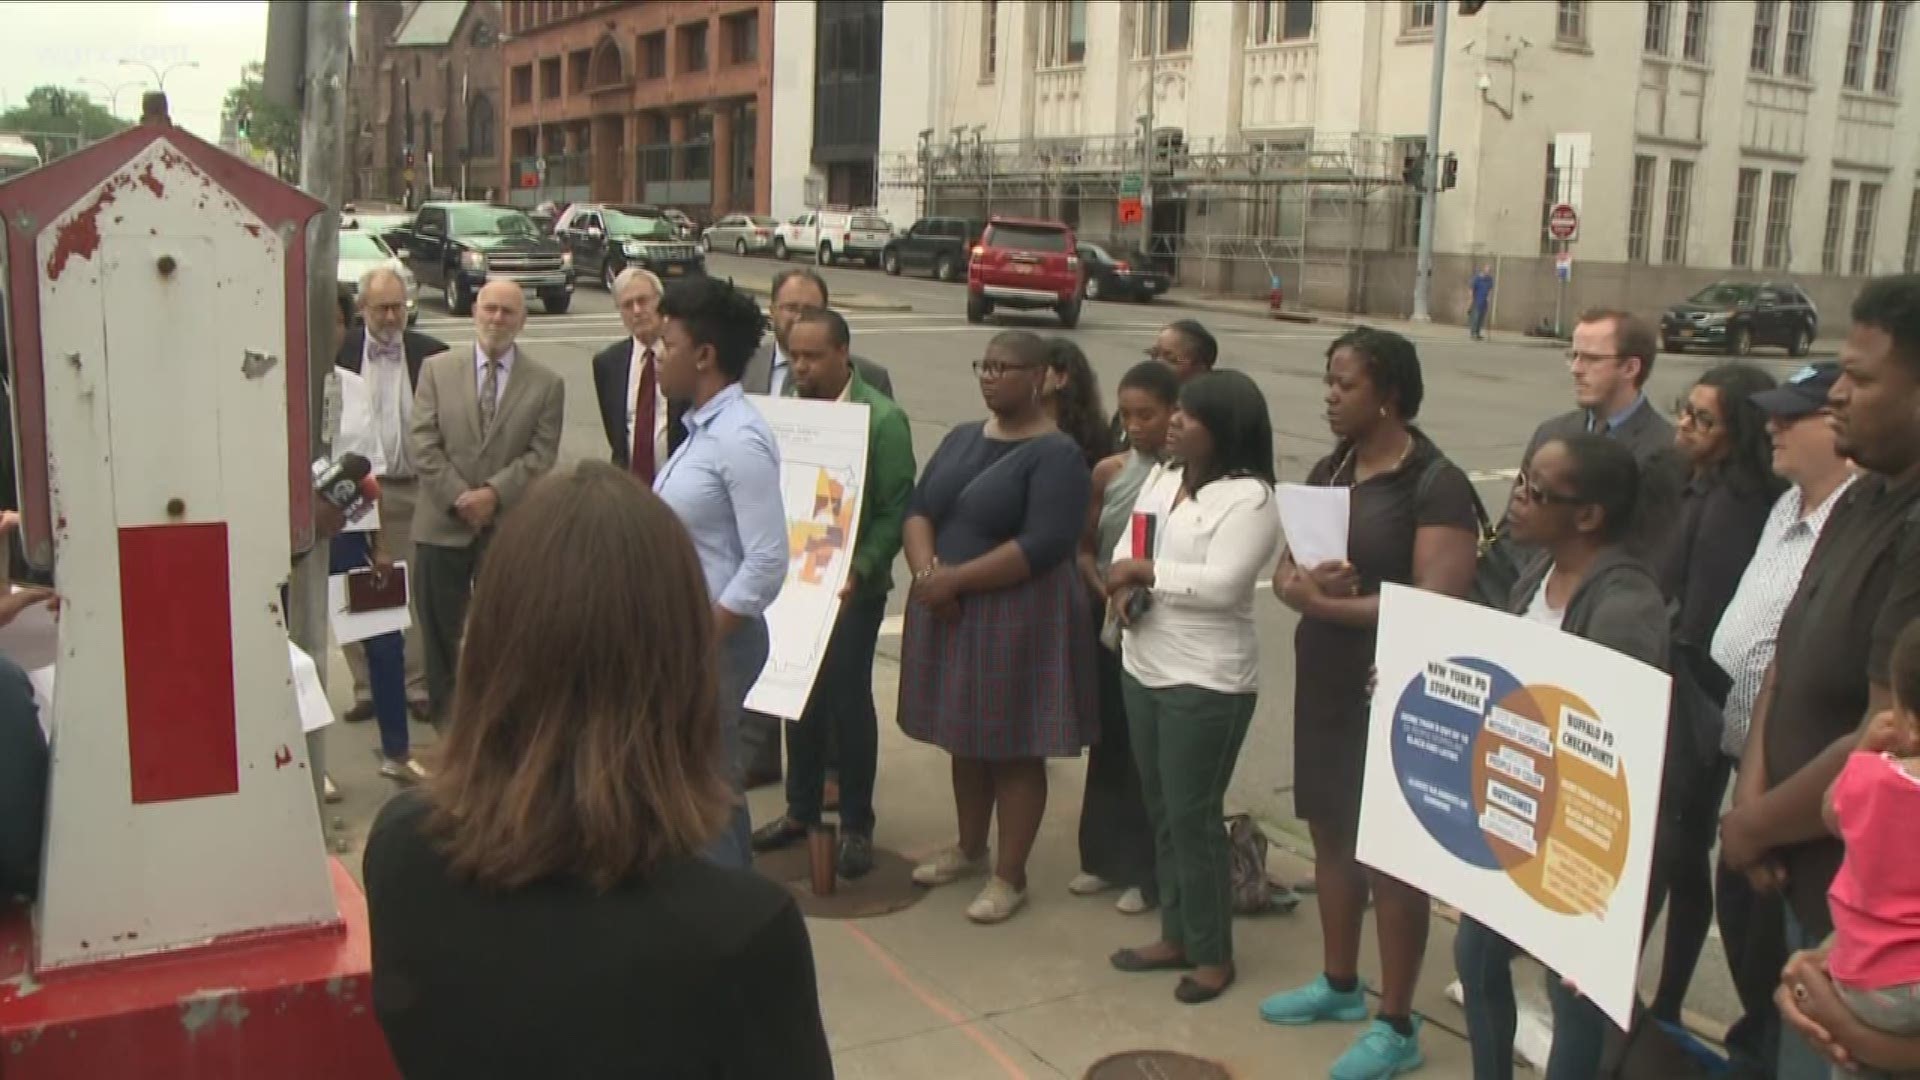 Civil rights groups want to take the City of Buffalo to court over police checkpoints that they say are discriminatory.